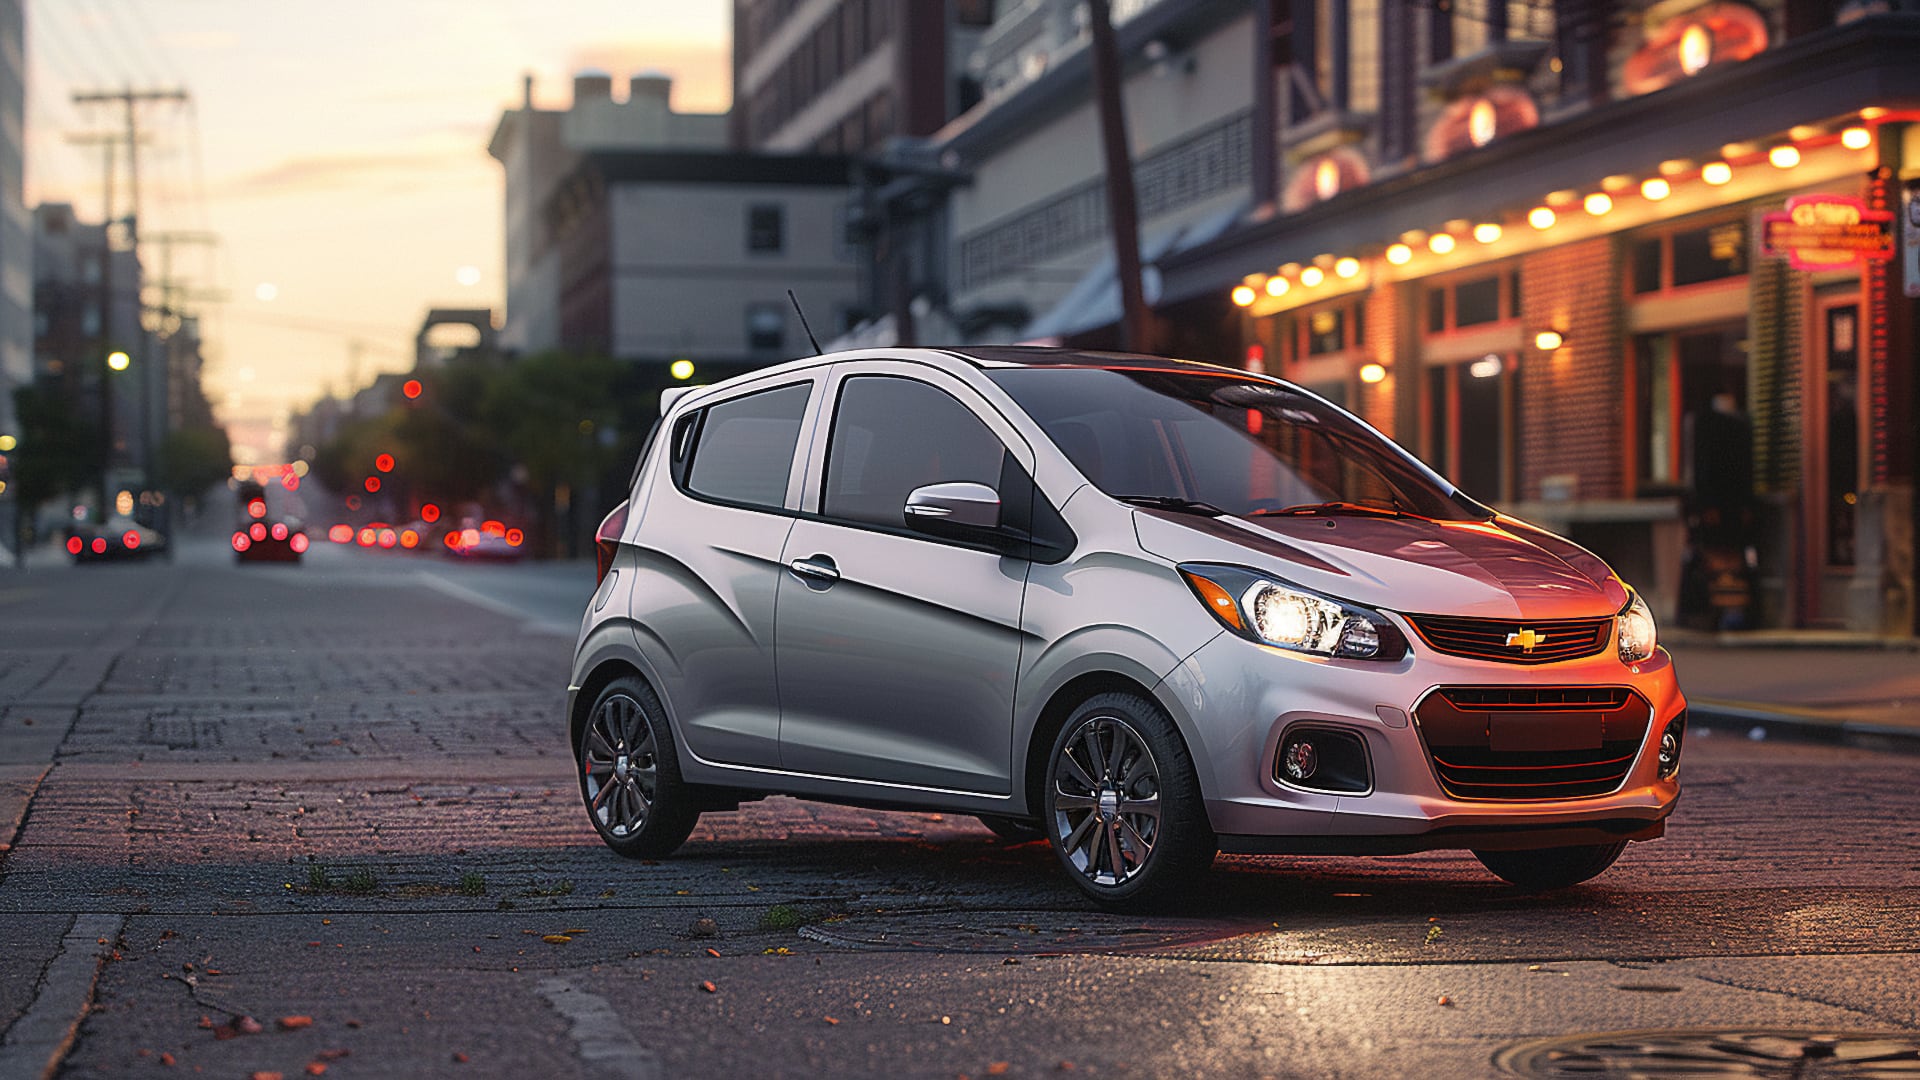 The 2019 Chevrolet Spark is parked on a city street.